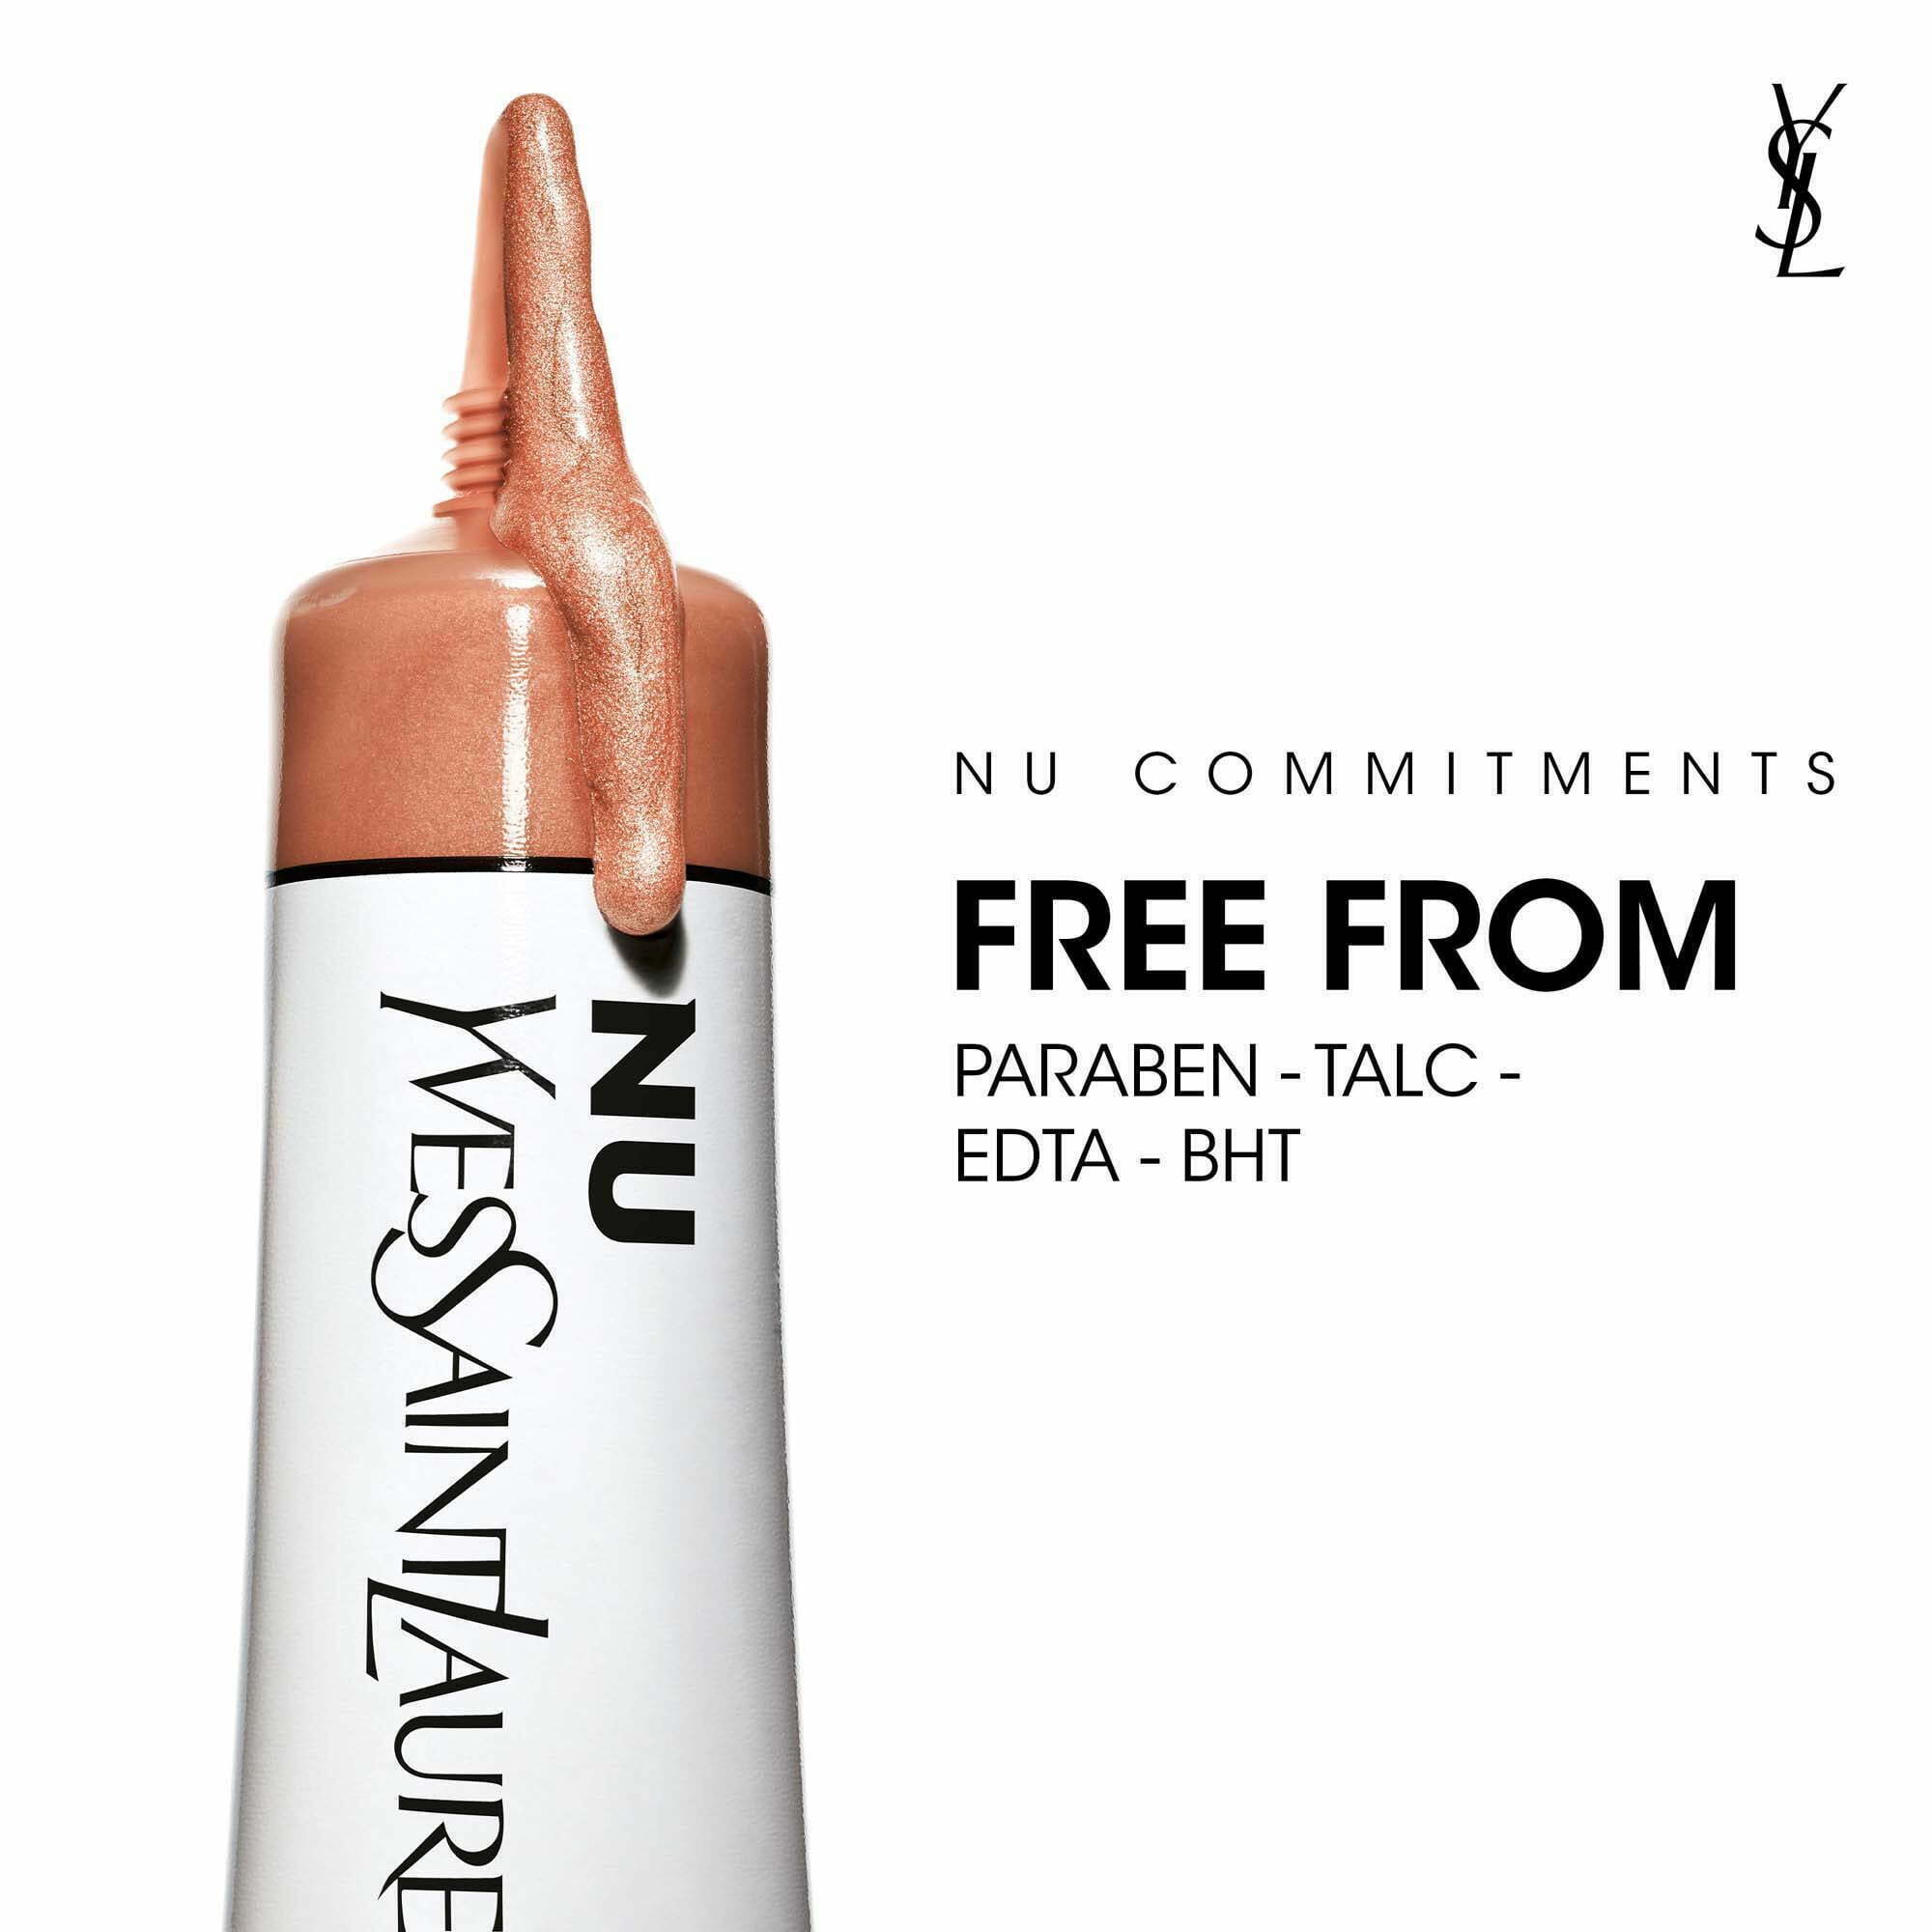 Yves Saint Laurent NU HALO TINT Highlighter with Vitamin E